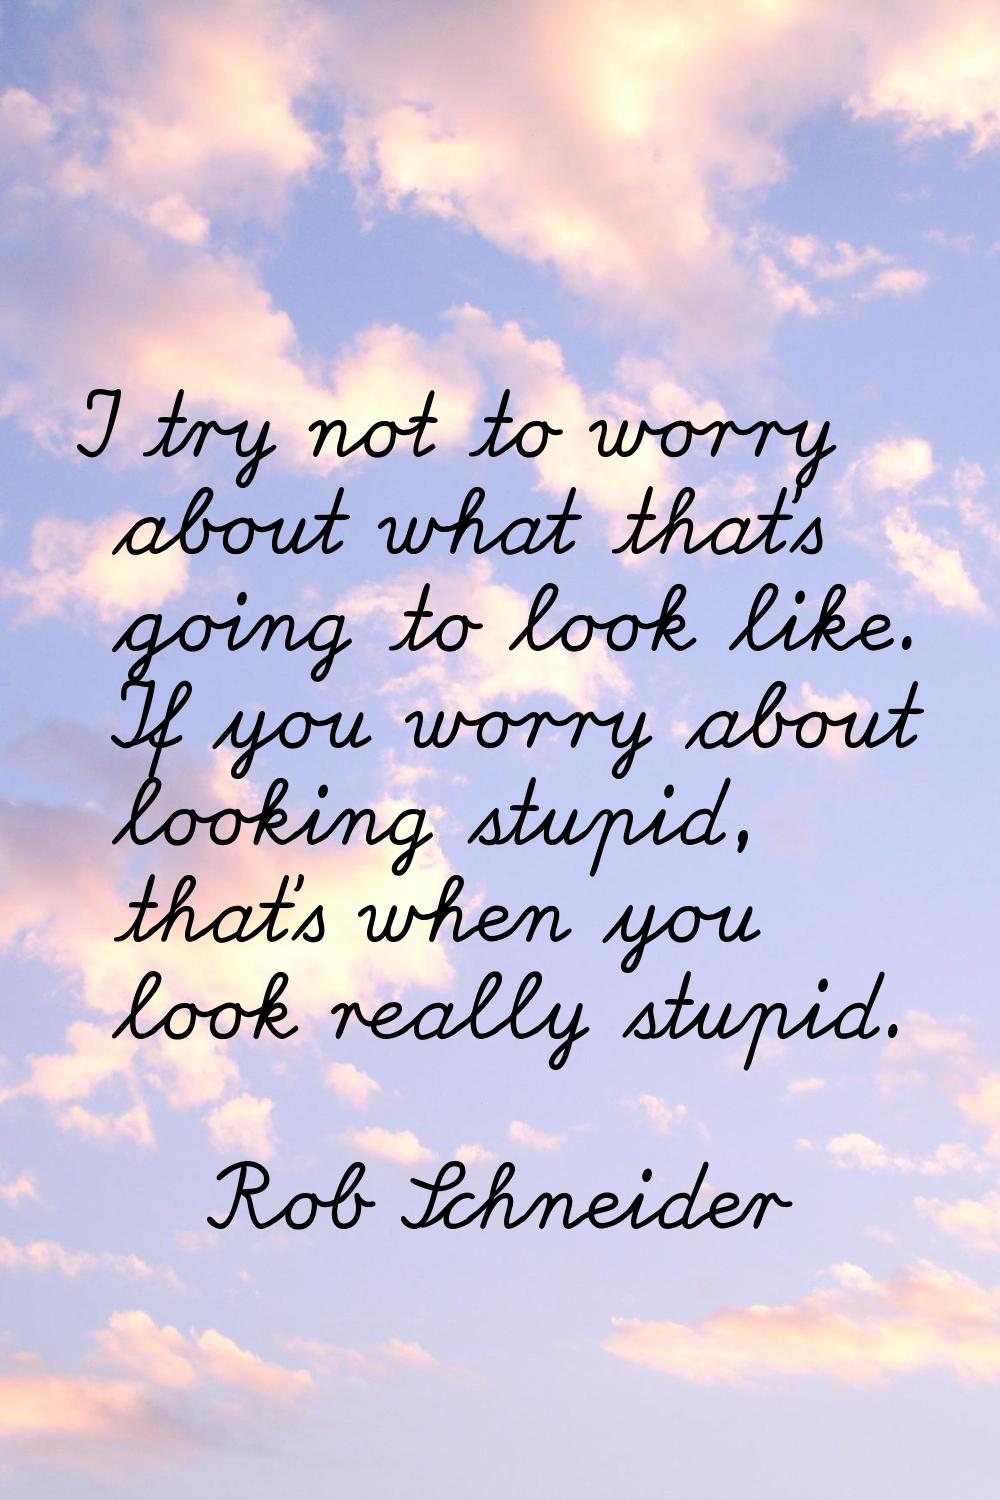 I try not to worry about what that's going to look like. If you worry about looking stupid, that's 